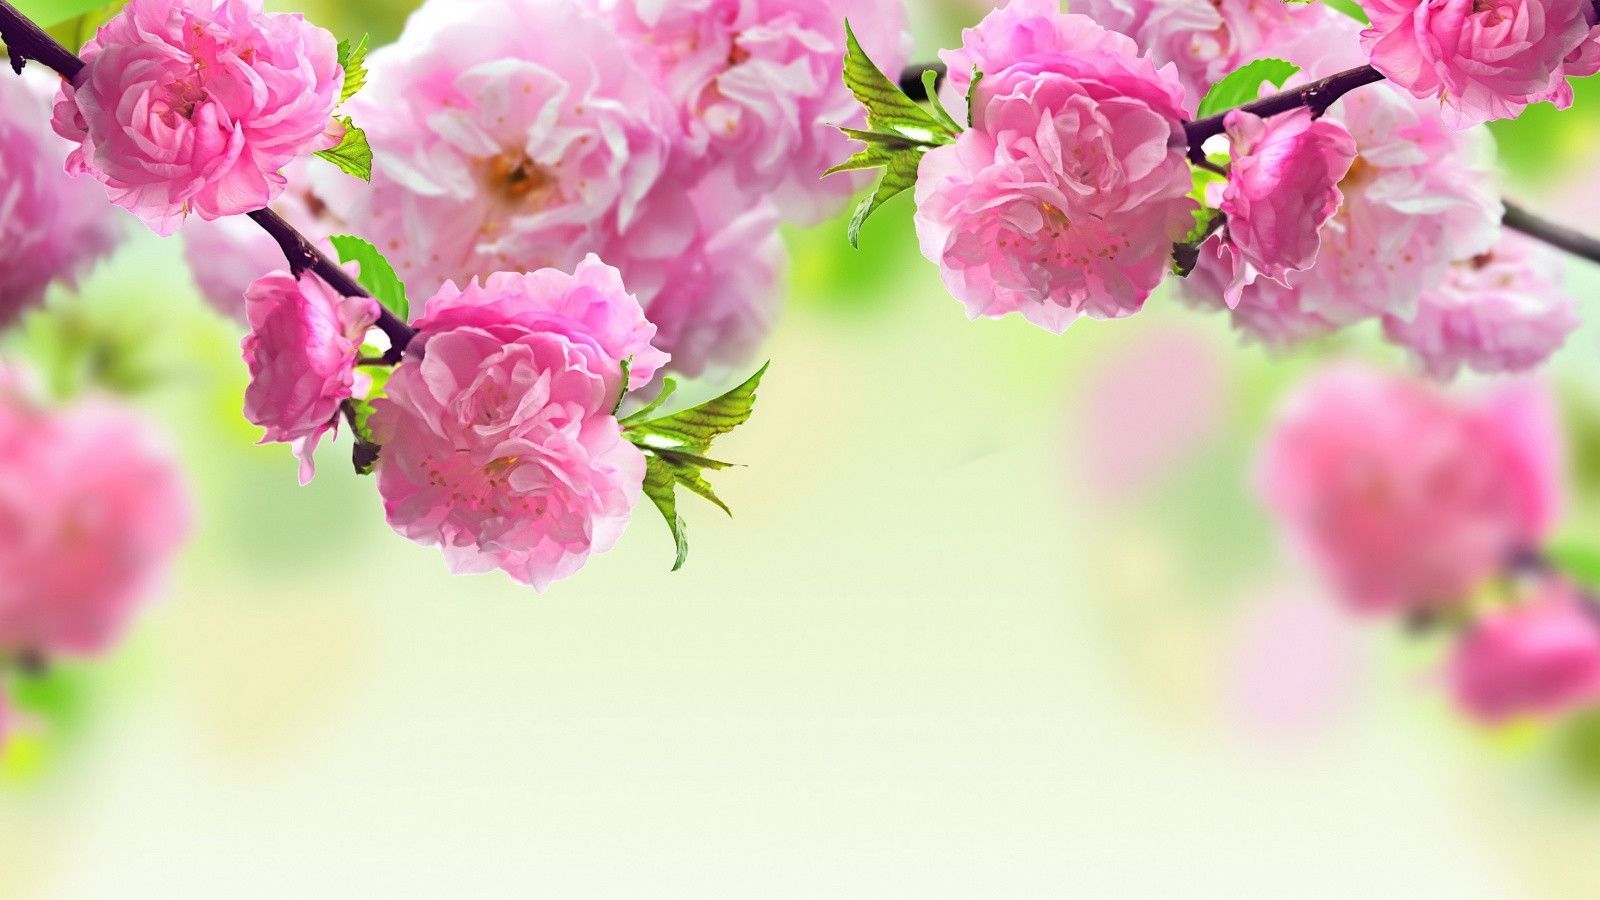 Spring Flowers Wallpapers Photo Free Download > SubWallpapers